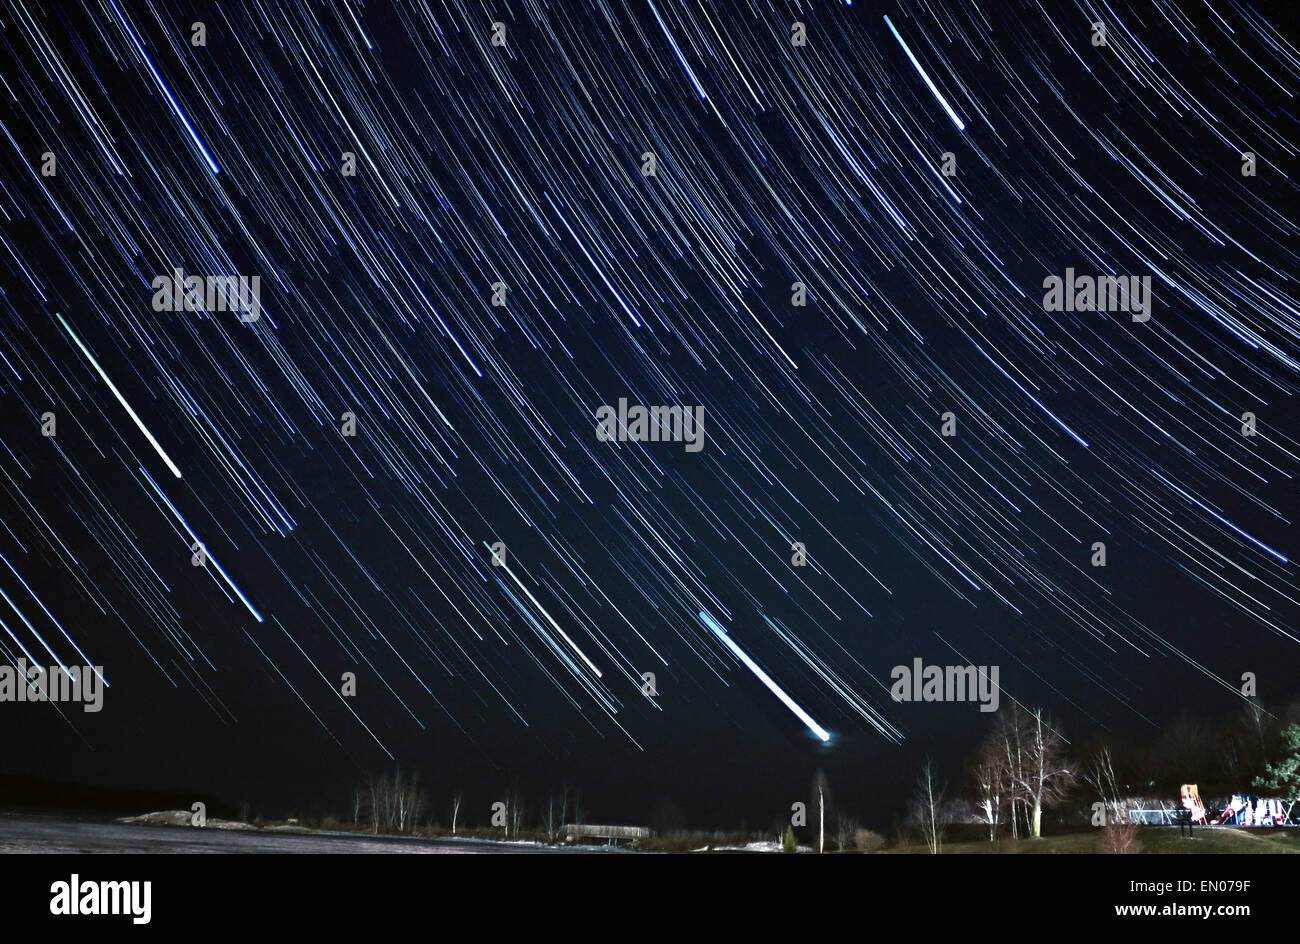 Star trails as if countless shooting stars descending from night sky to earth. Stock Photo